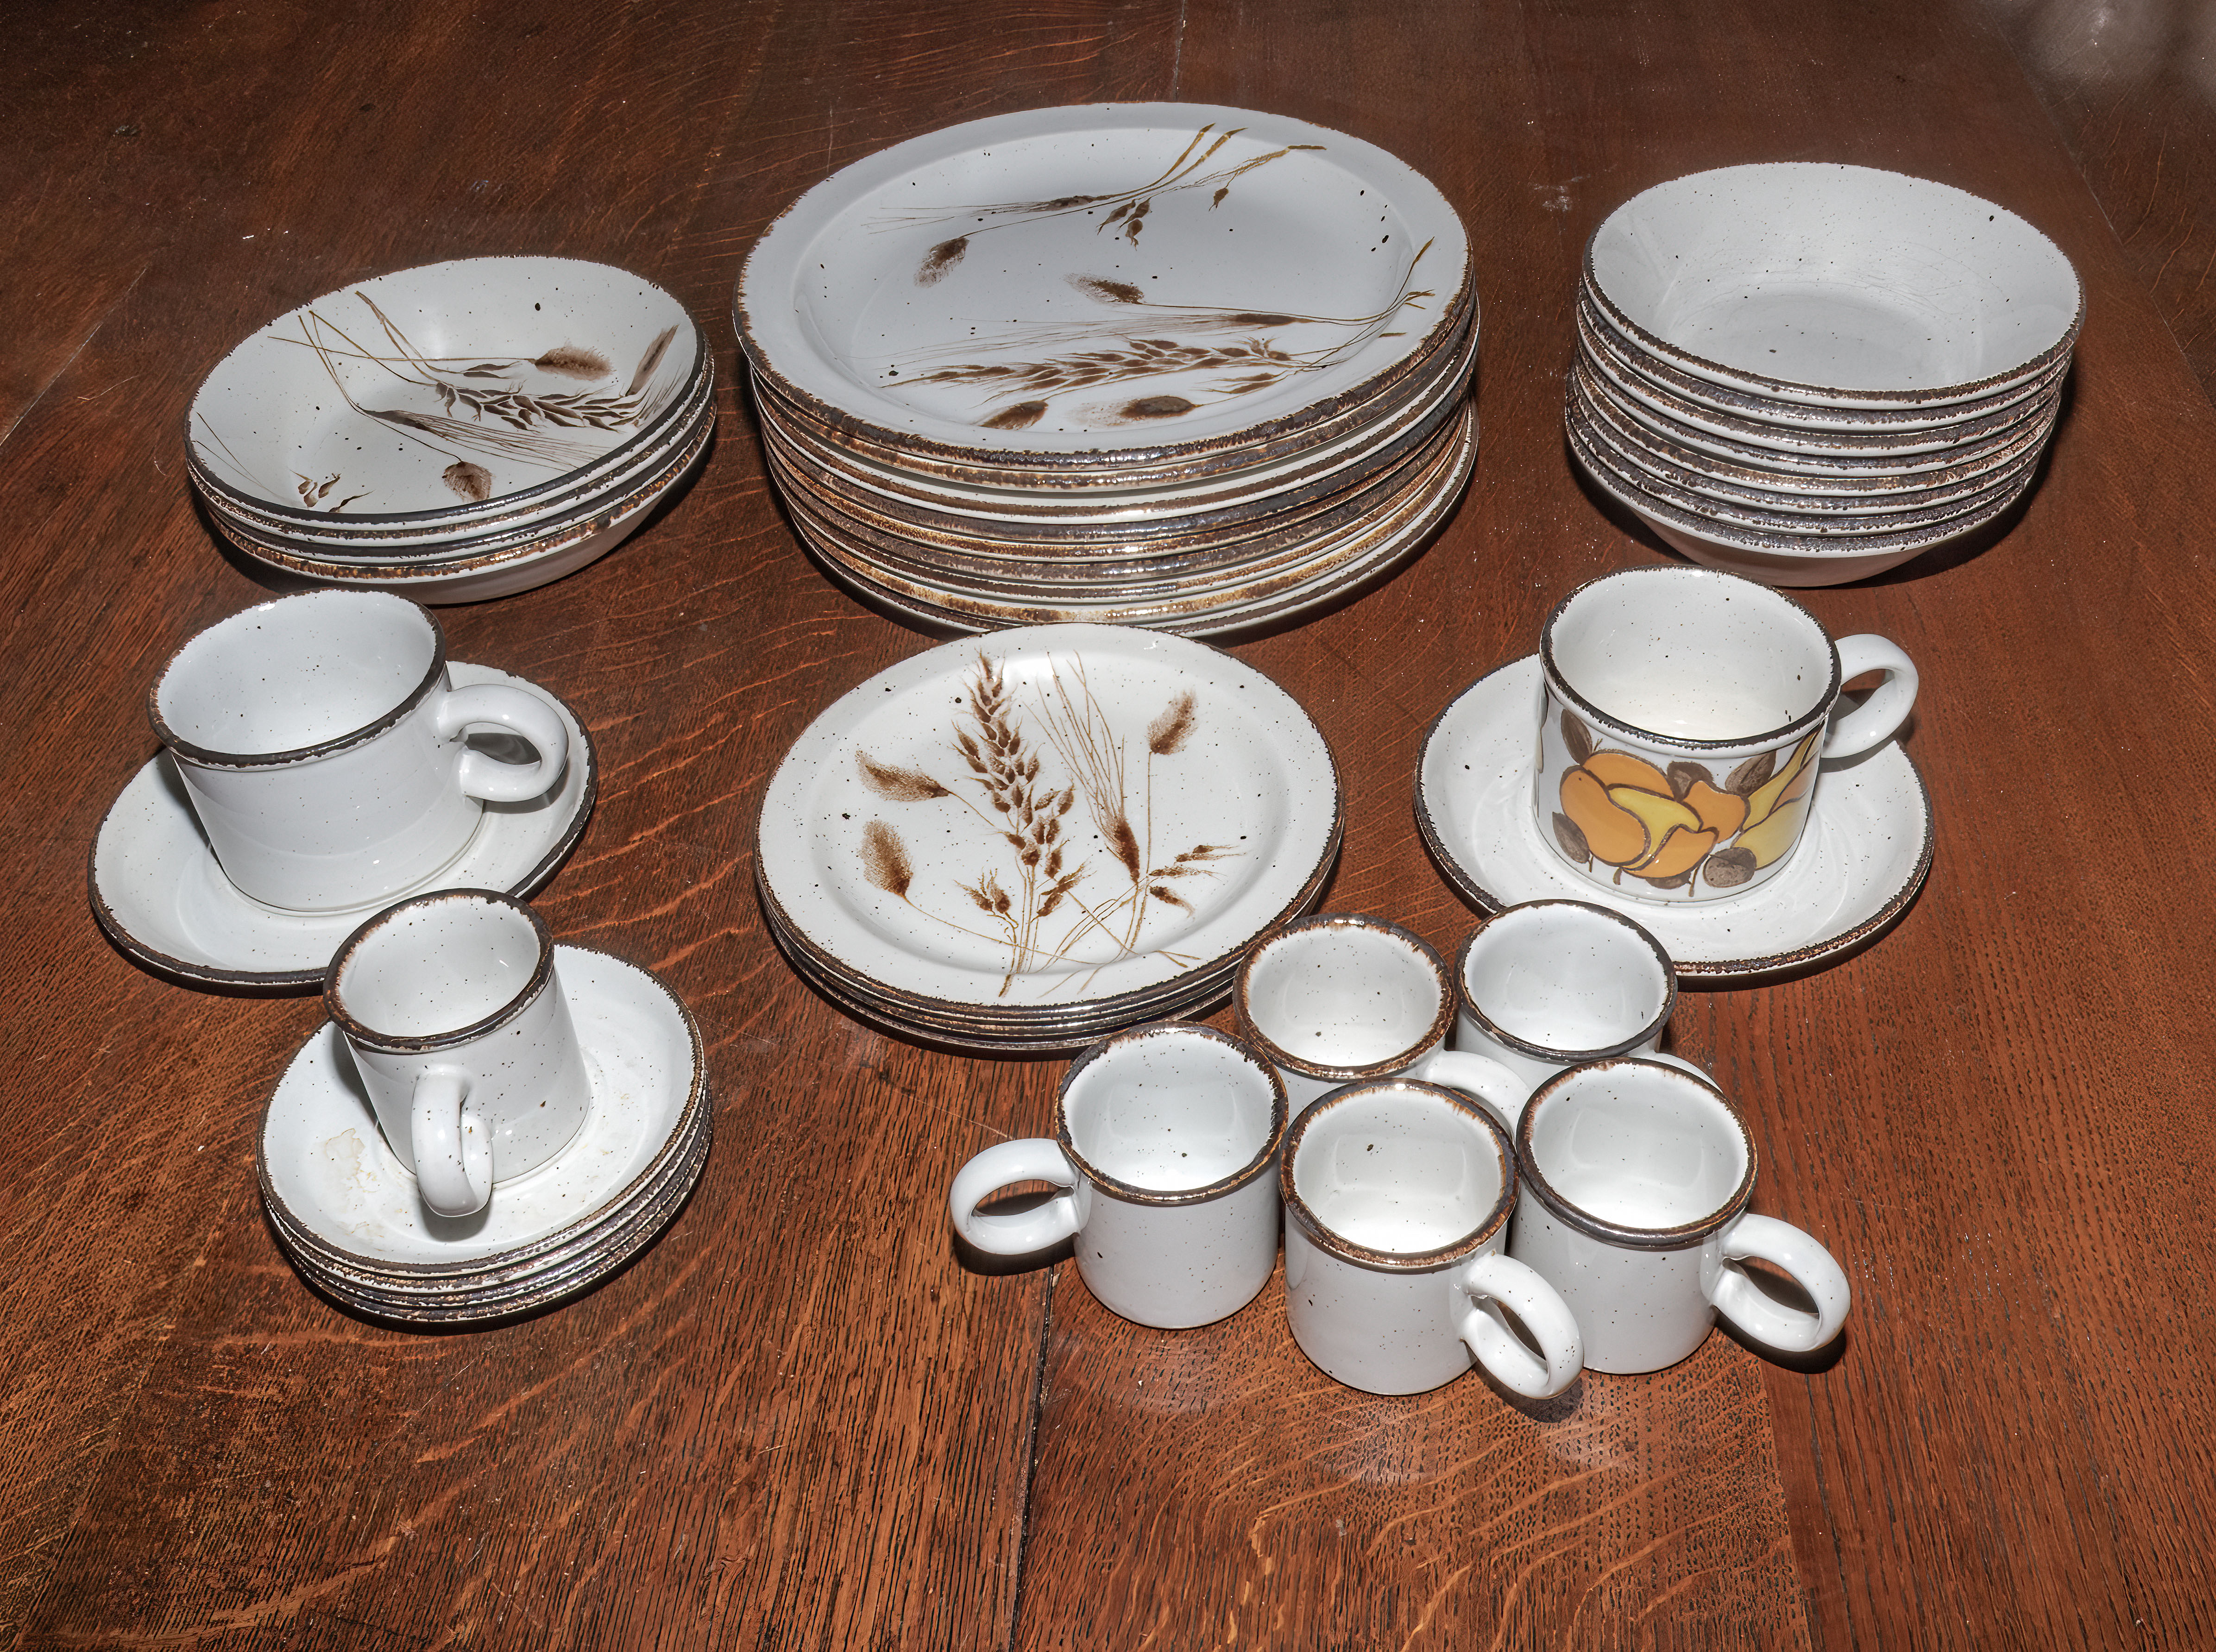 Midwinter ‘Wild Oats’ table ware